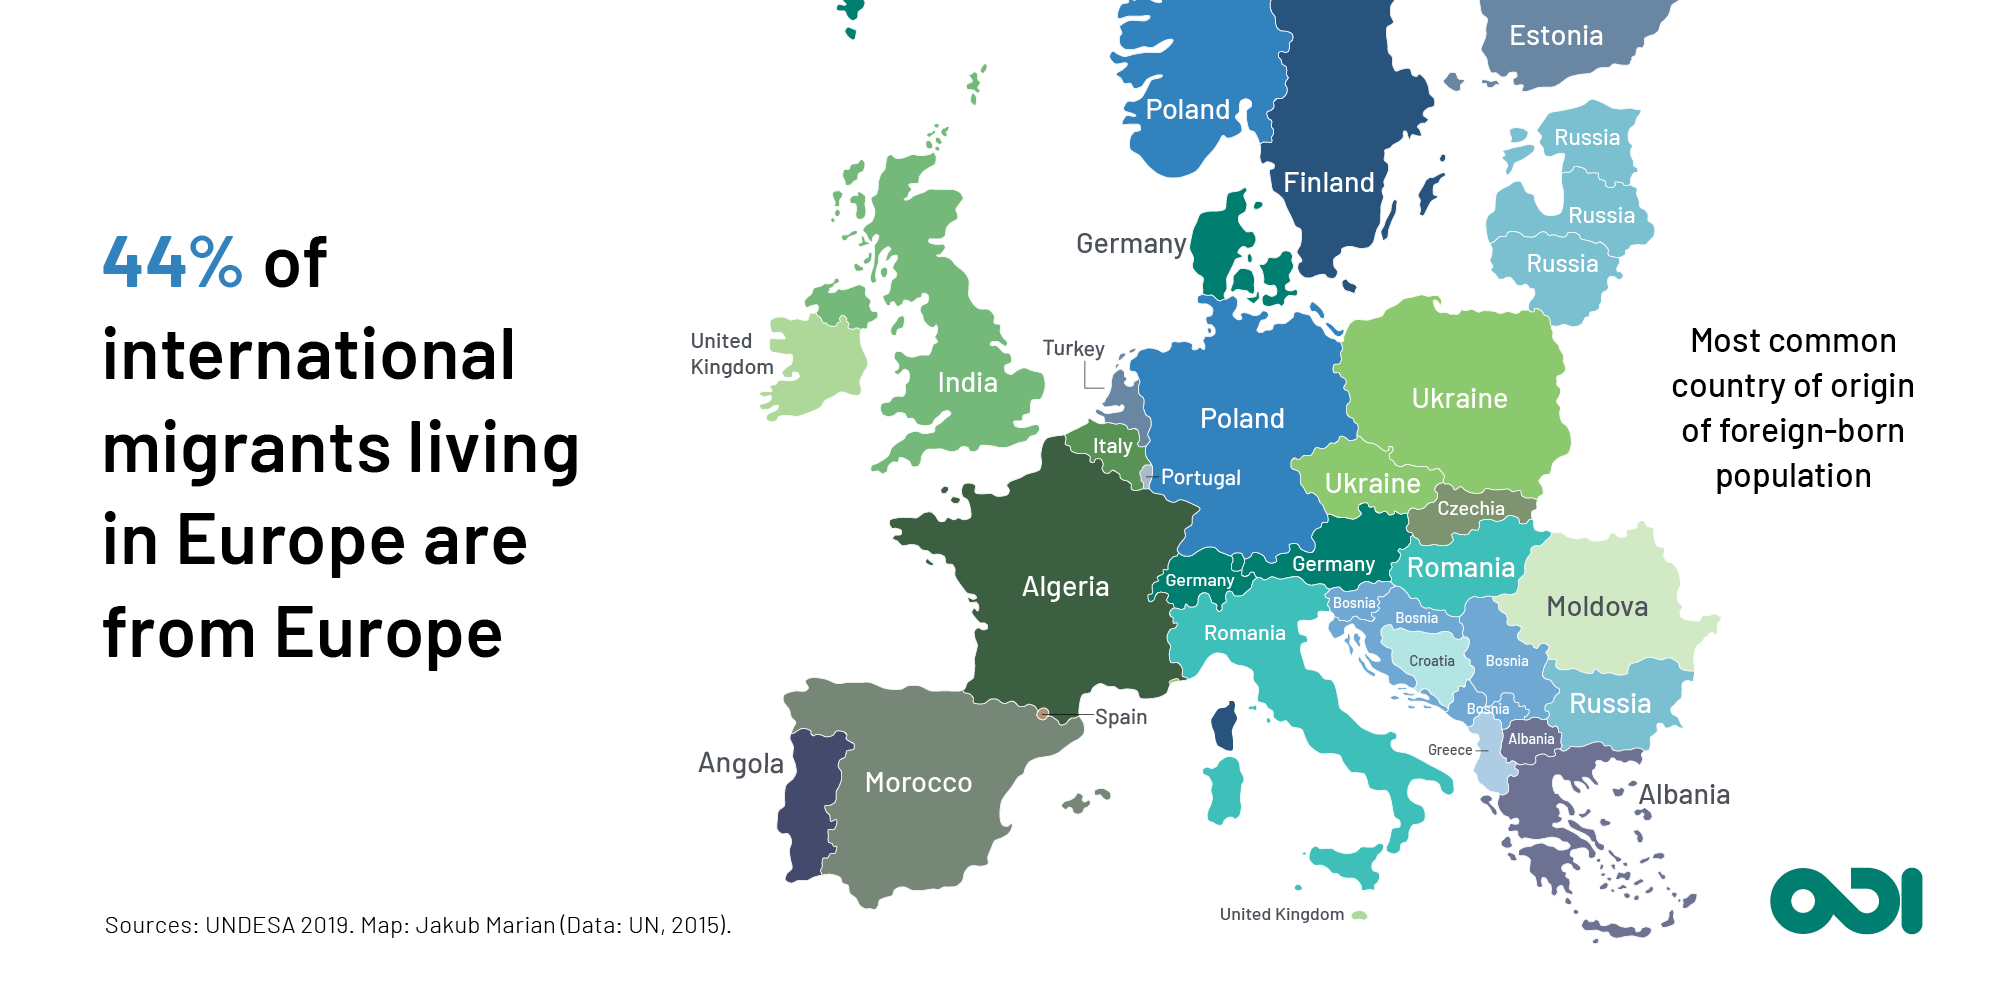 Infographic: 44% of international migrants living in Europe are from Europe